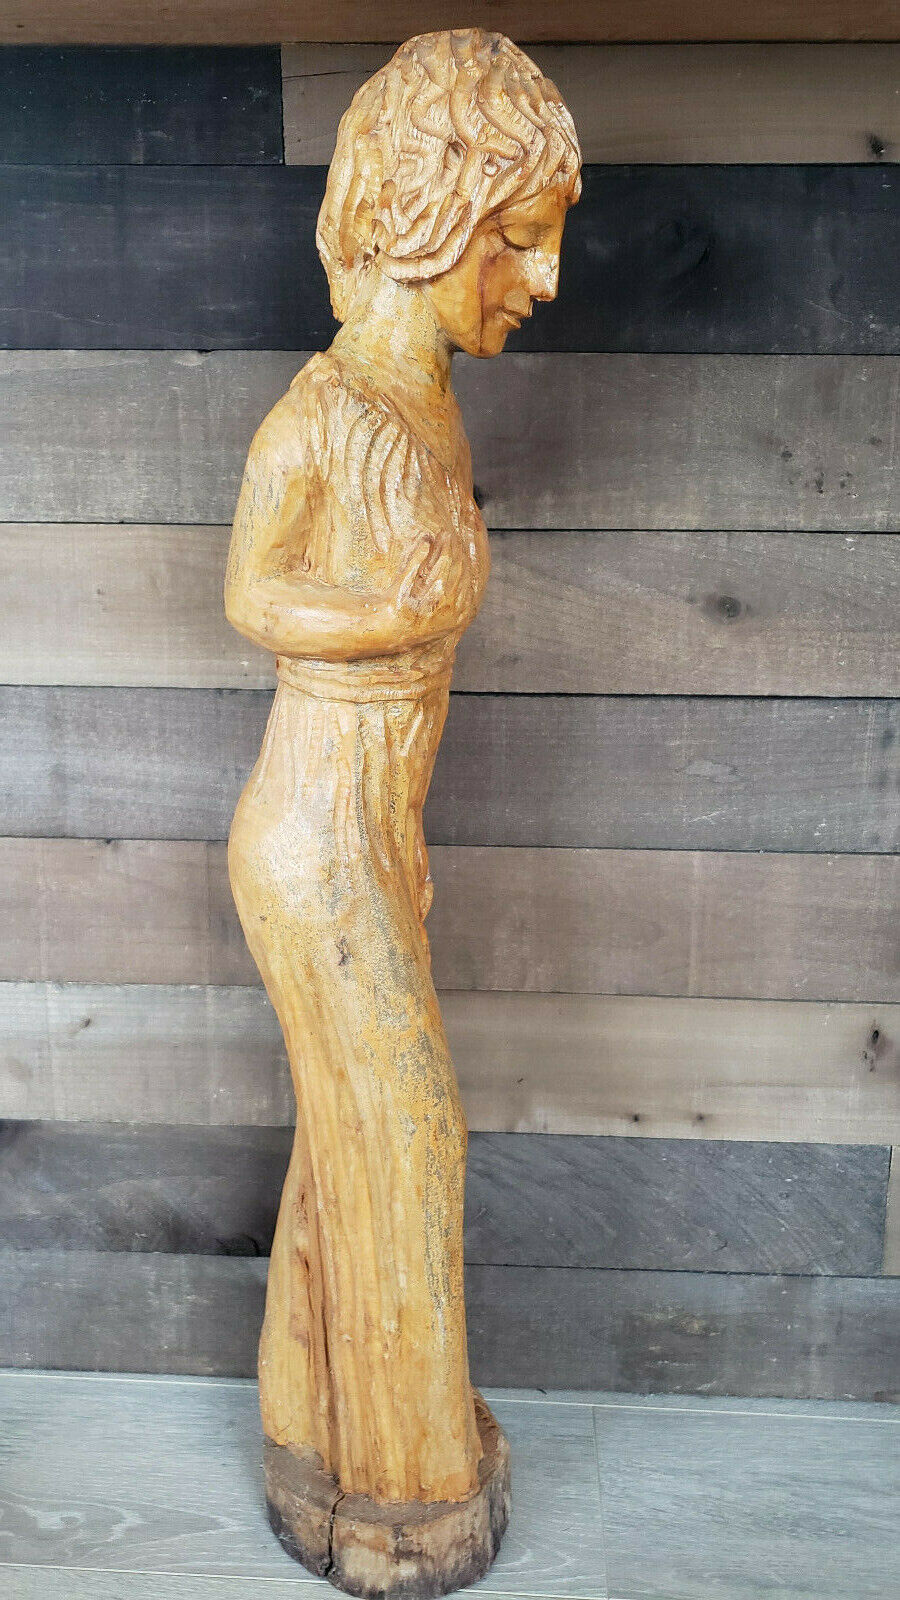 Rare Vintage Handcarved Wooden Statue of a Woman Holding Her Breast. 34" Без бренда - фотография #2